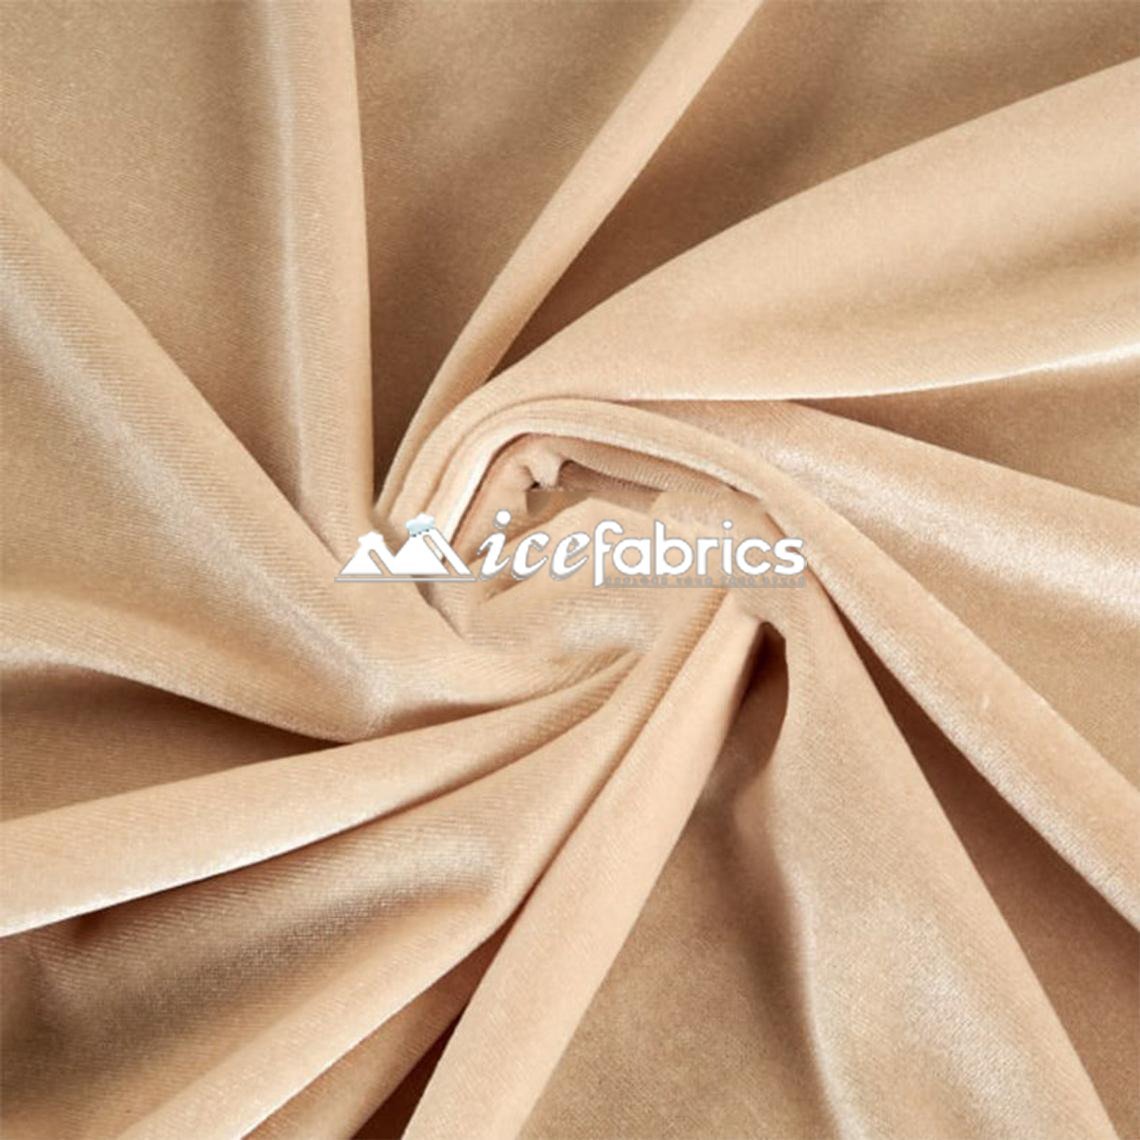 Hight Quality Stretch Velvet Fabric By The Roll (20 yards) Wholesale FabricVelvet FabricICE FABRICSICE FABRICSChampagneBy The Roll (60" Wide)Hight Quality Stretch Velvet Fabric By The Roll (20 yards) Wholesale Fabric ICE FABRICS Champagne